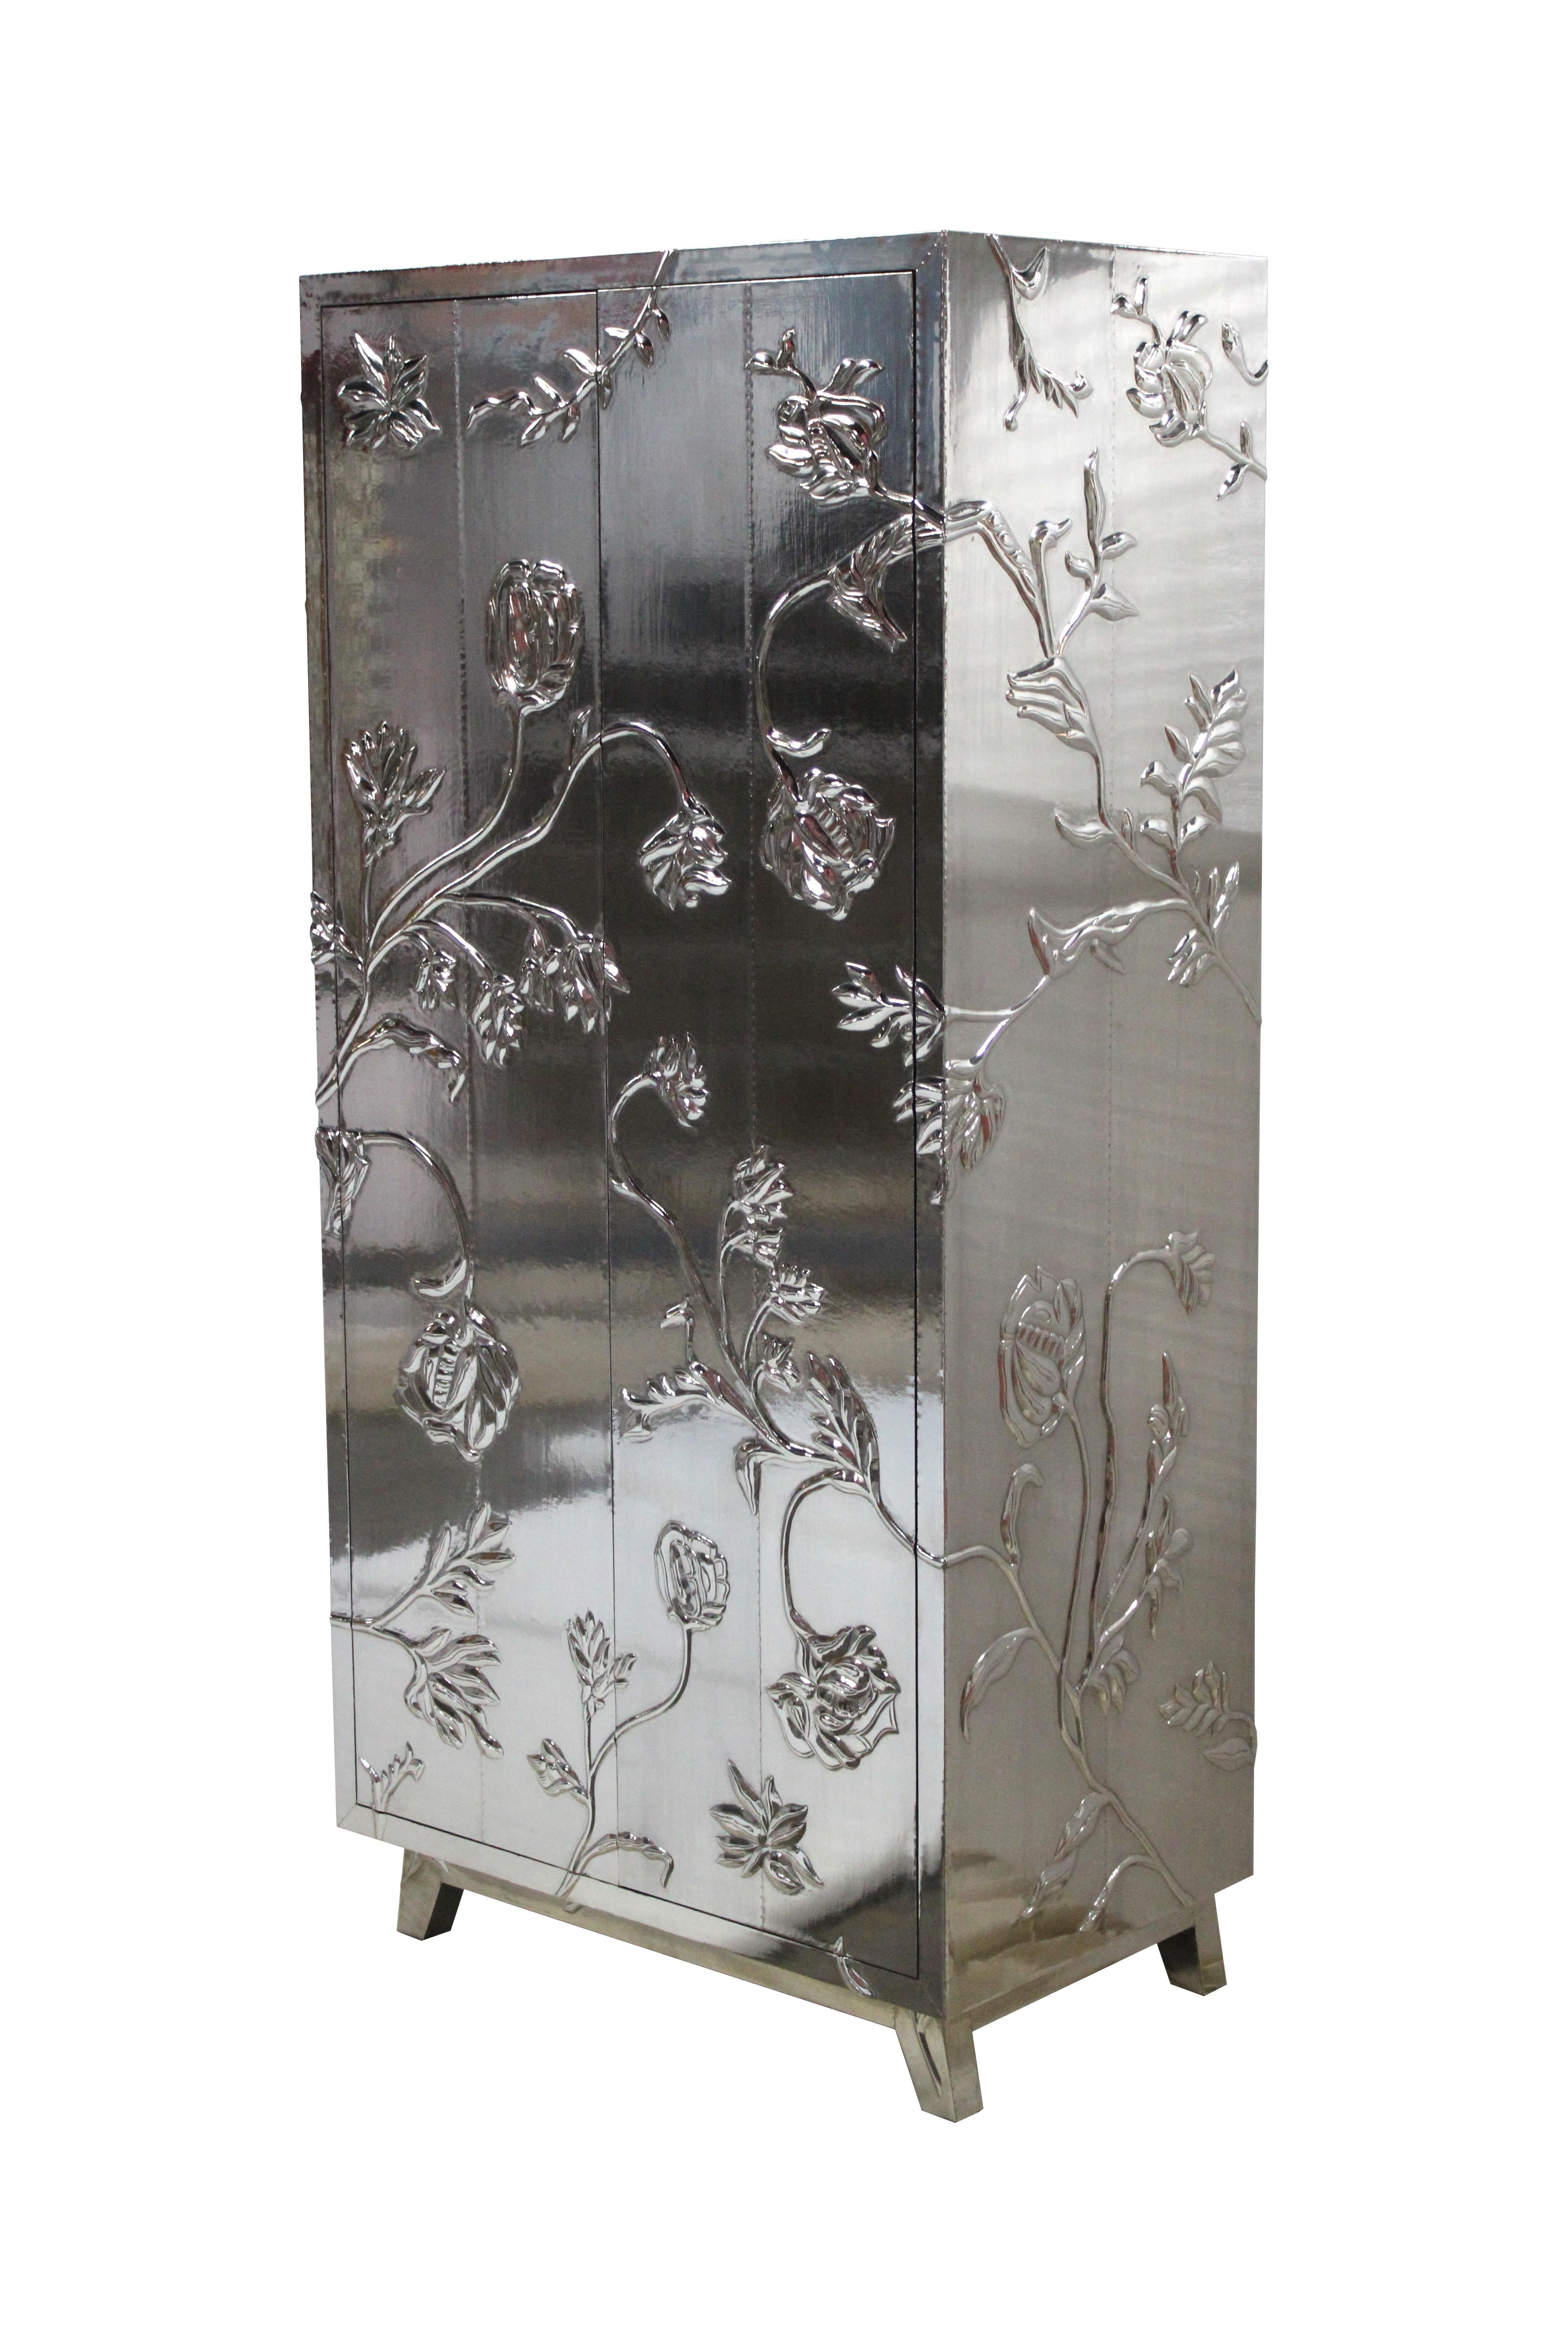 Antique wardrobe and armoire in floral white bronze clad, handcrafted in India is Inspired by the floral motifs used in the paintings of palaces of Rajasthan. One of the bestselling wardrobes and armoires of Stephanie Odegard 's case pieces and